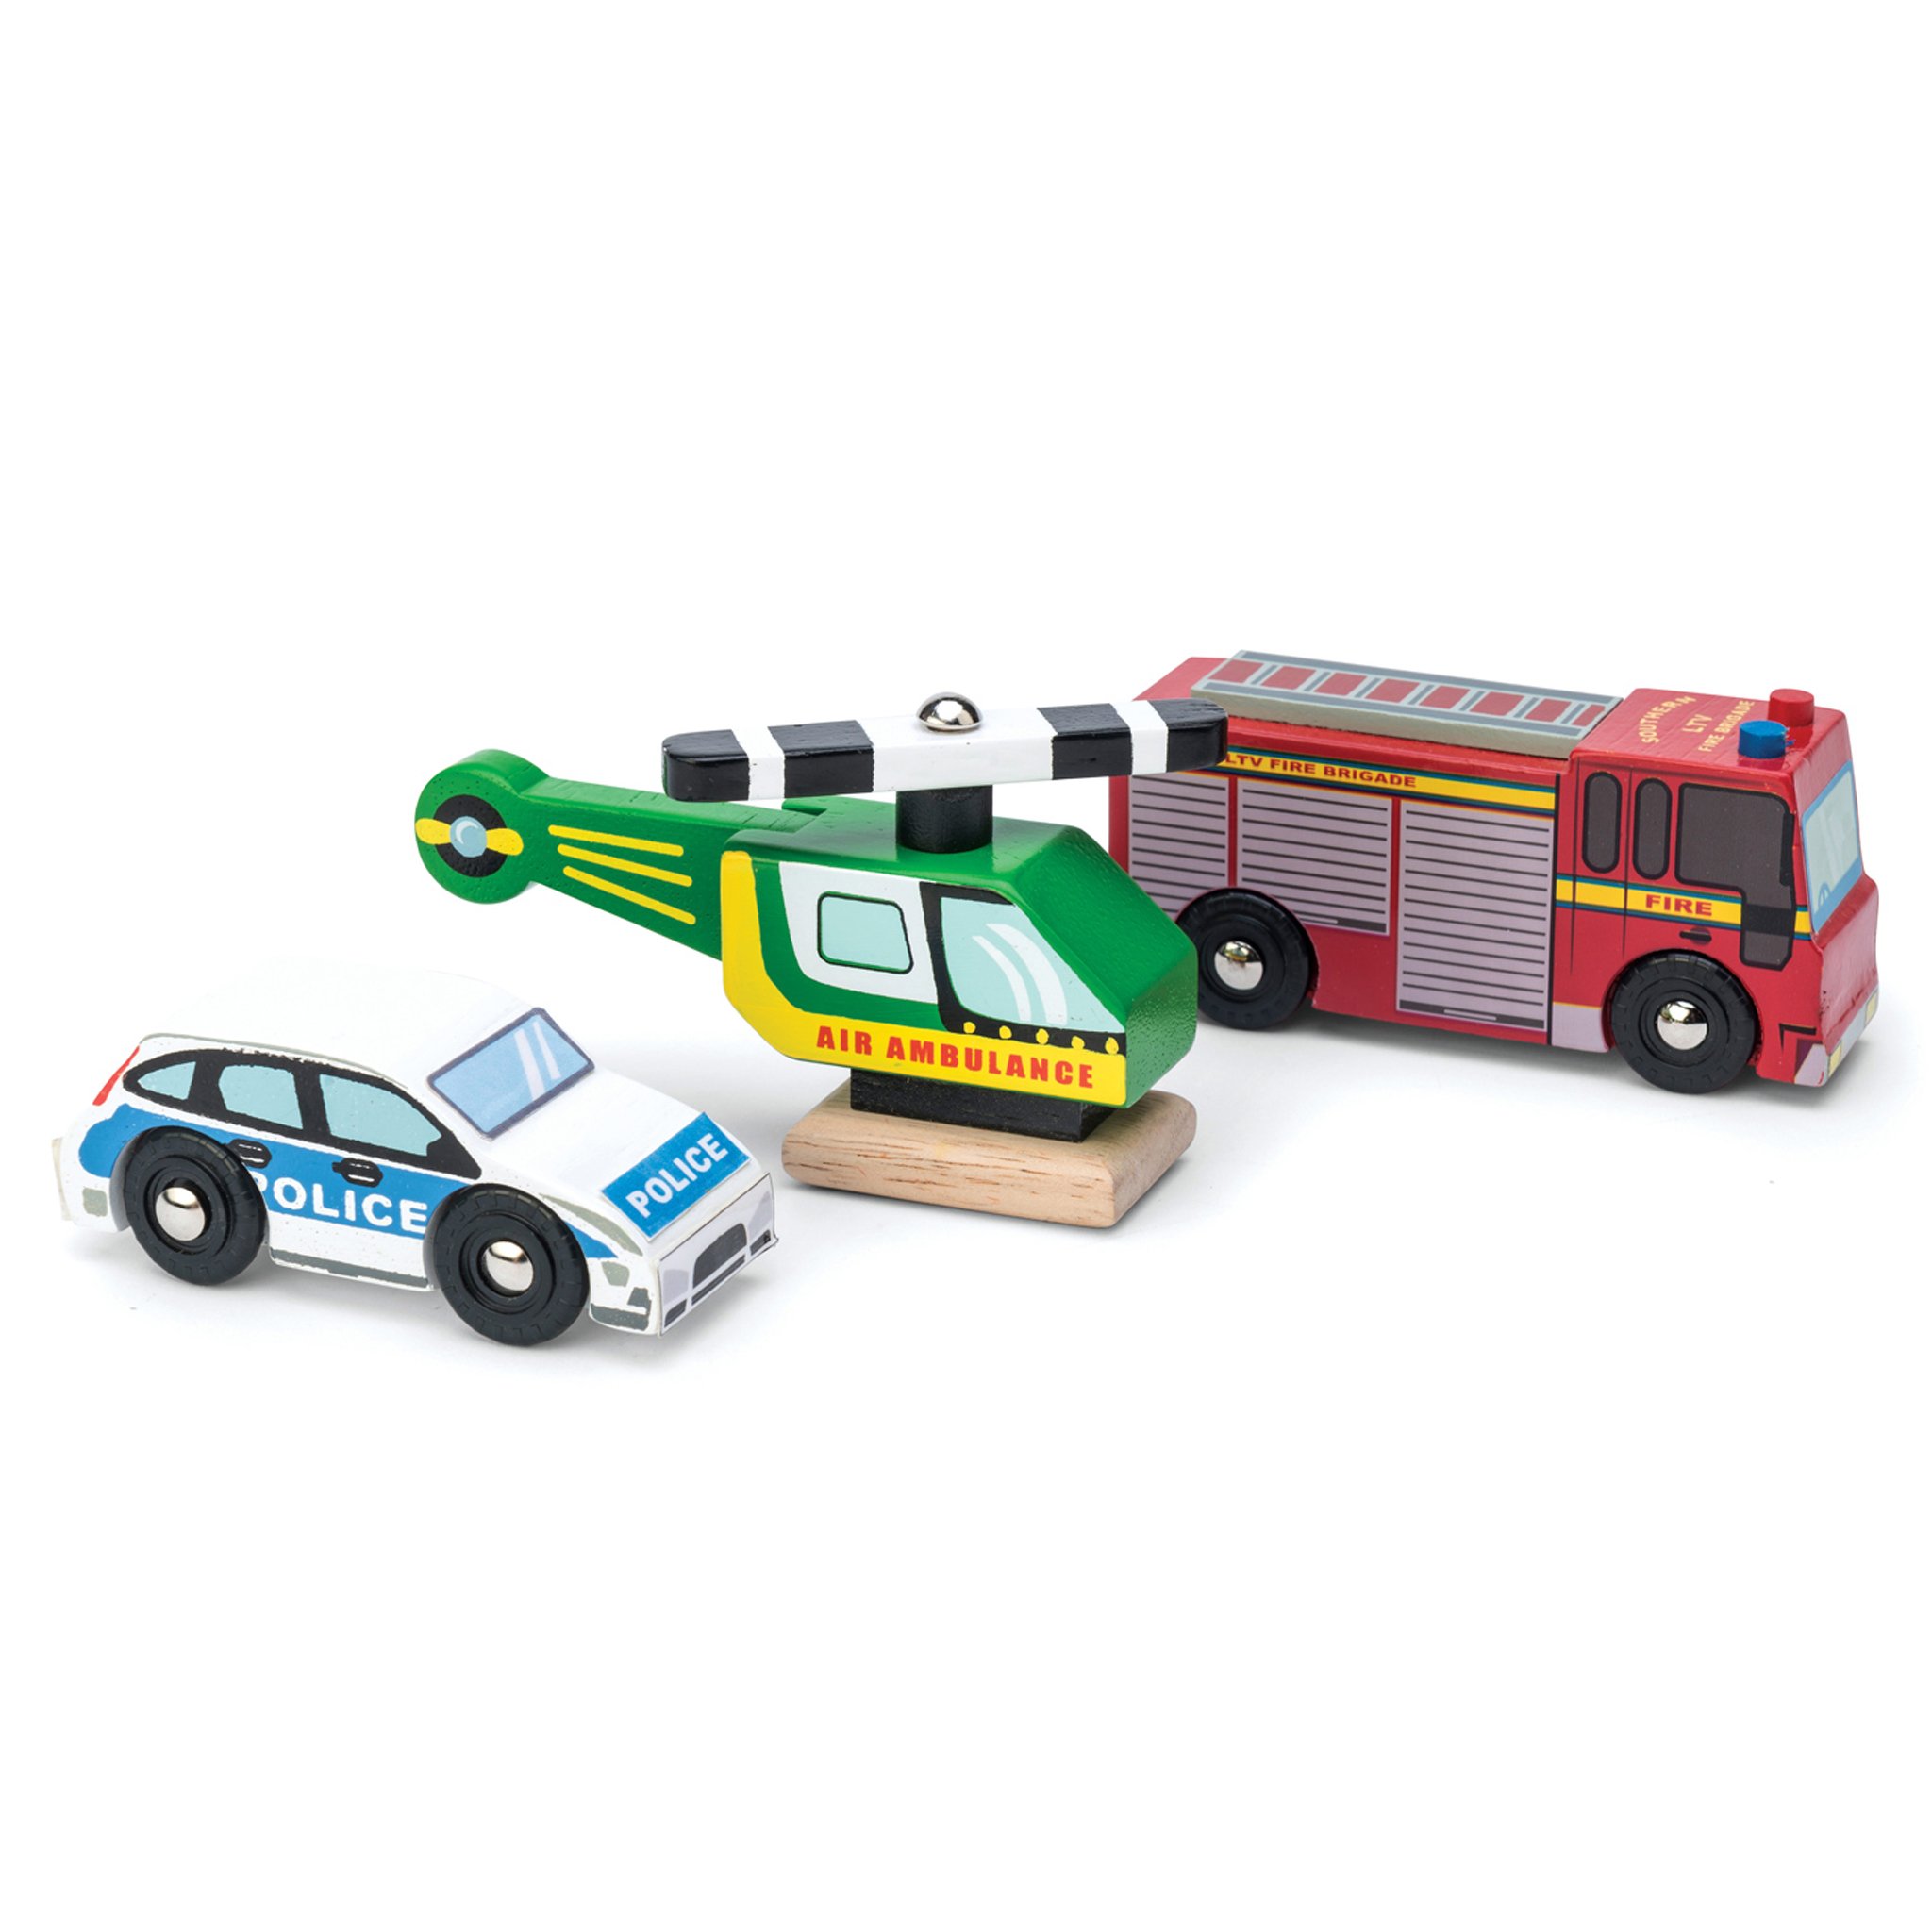 TV465-Emergency-Wooden-Vehicles-Police-Car-Helicopter-Fire-Truck